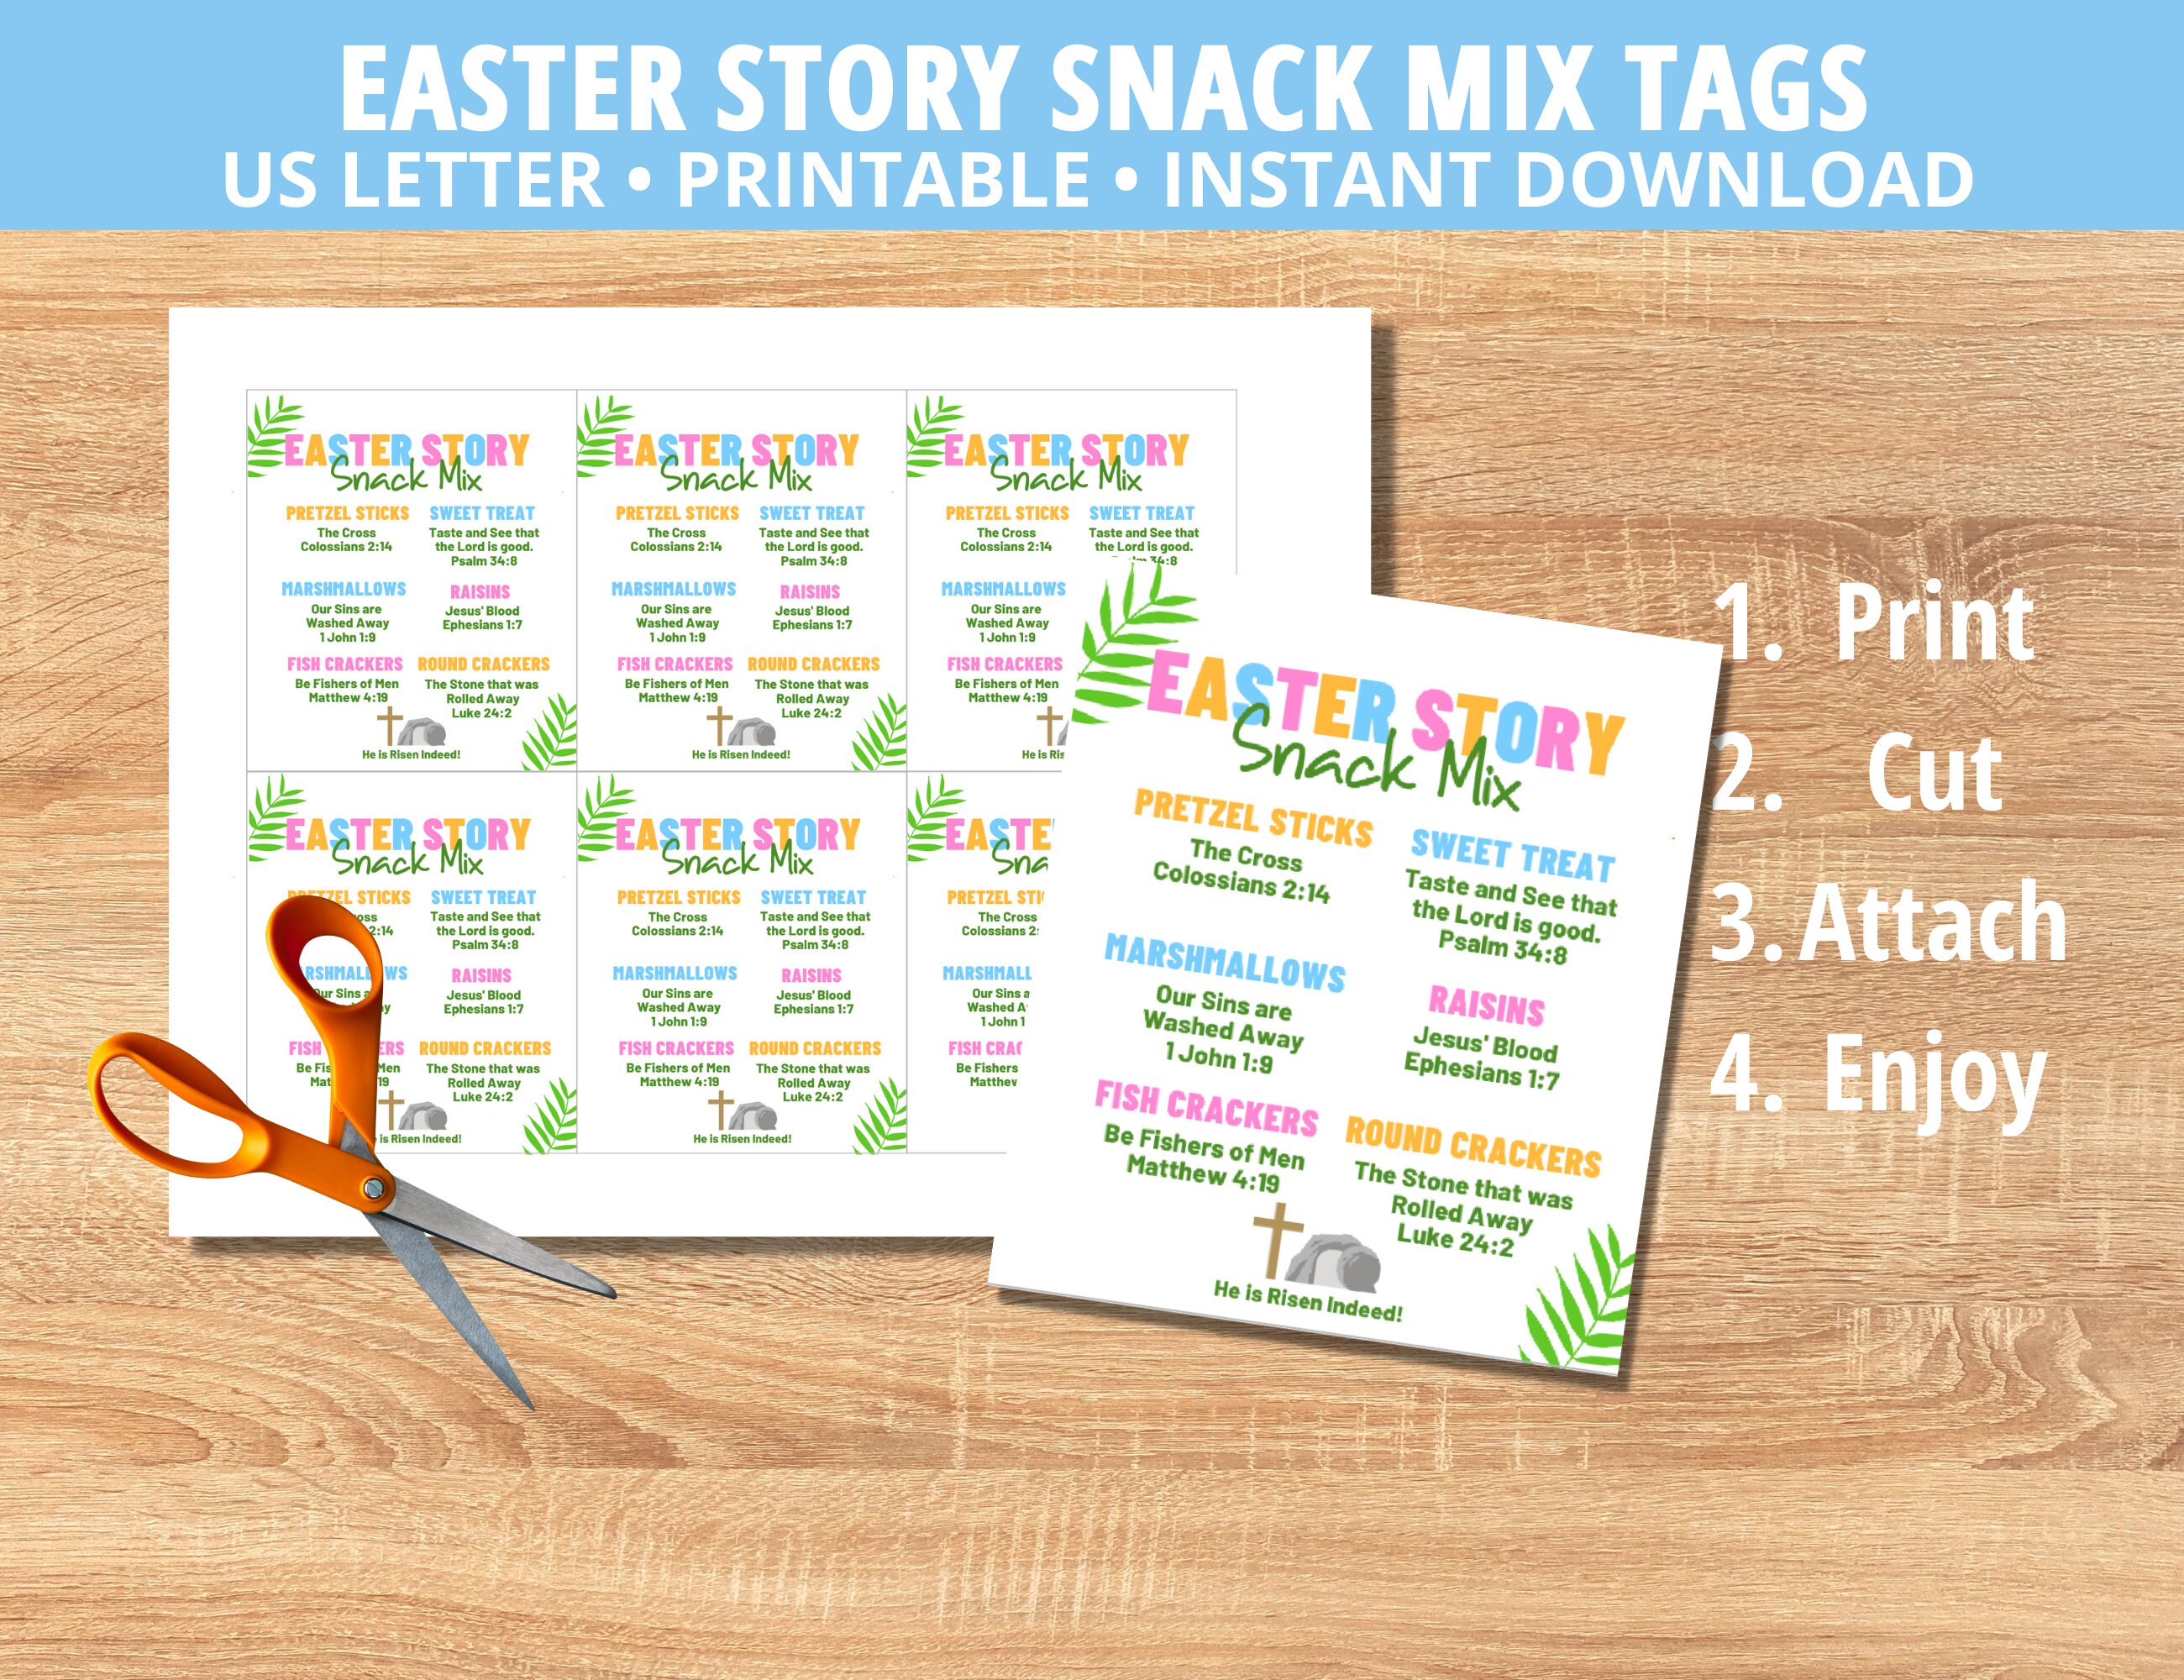 Easter Story Snack Mix, Easter Printable, Easter Story, Printable